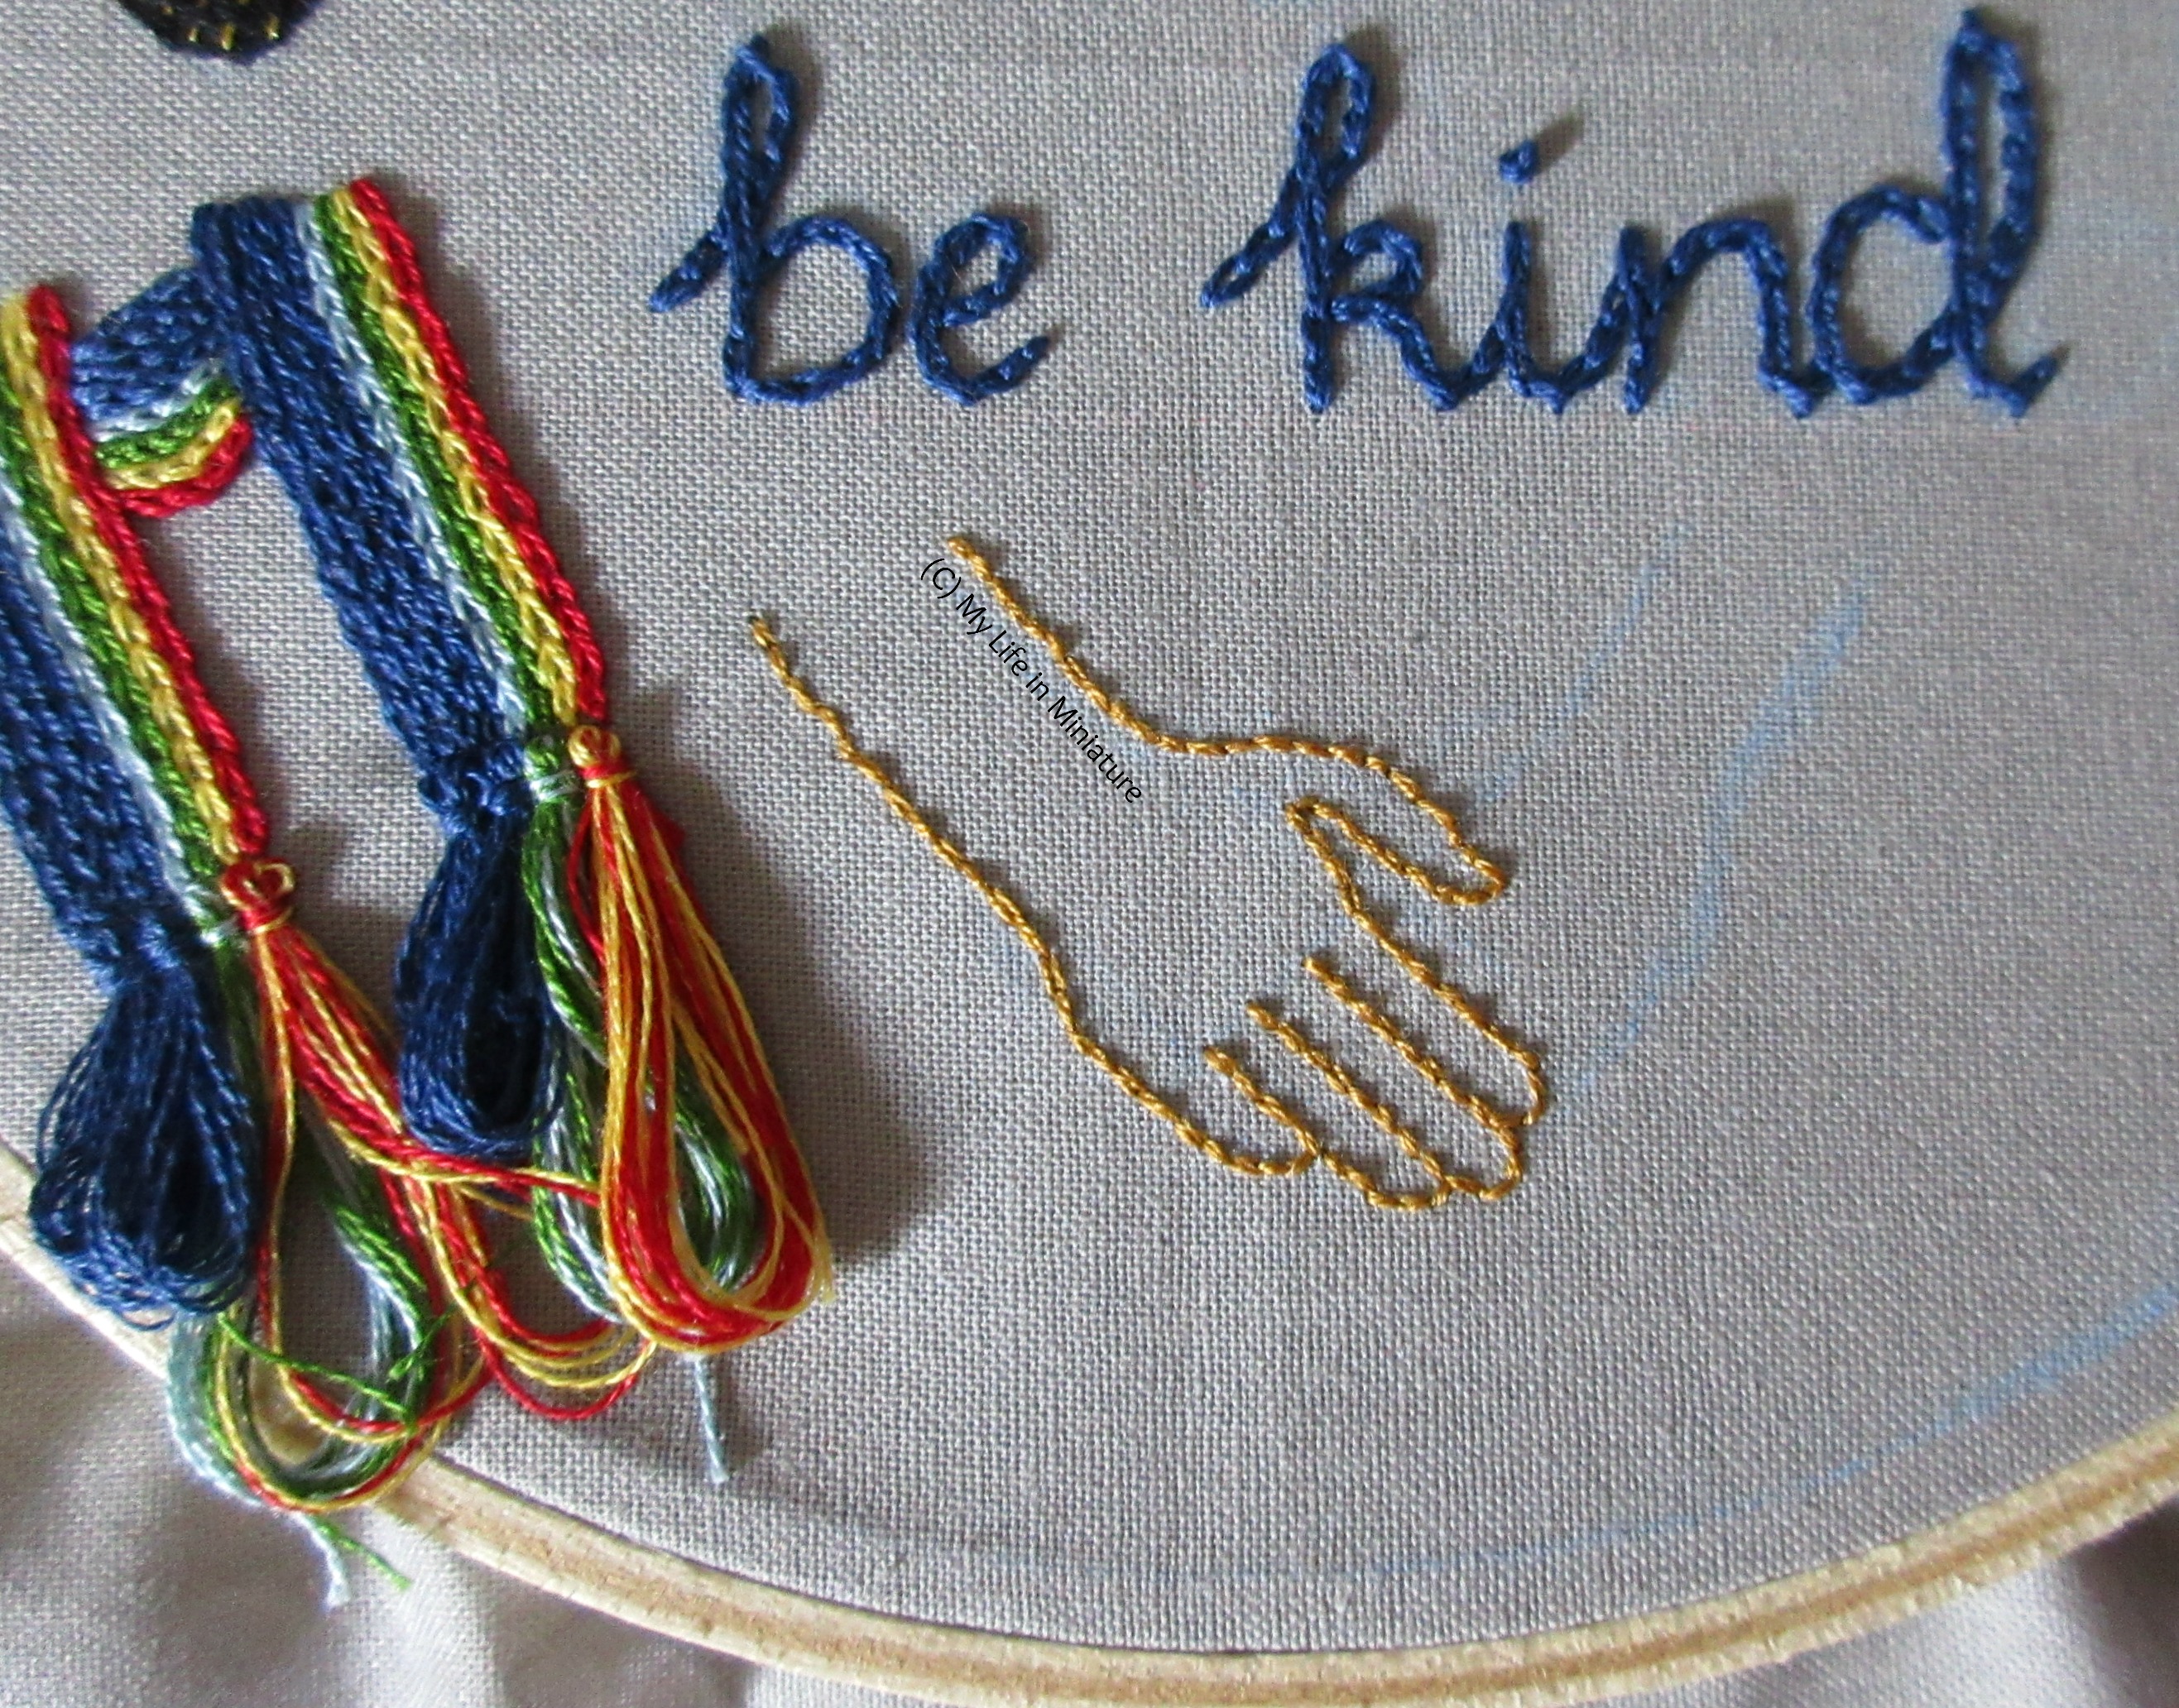 The bottom of the grey hoop is visible, with the scarf on the left. The outline of a hand reaching out as if to shake hands is stitched in gold. 